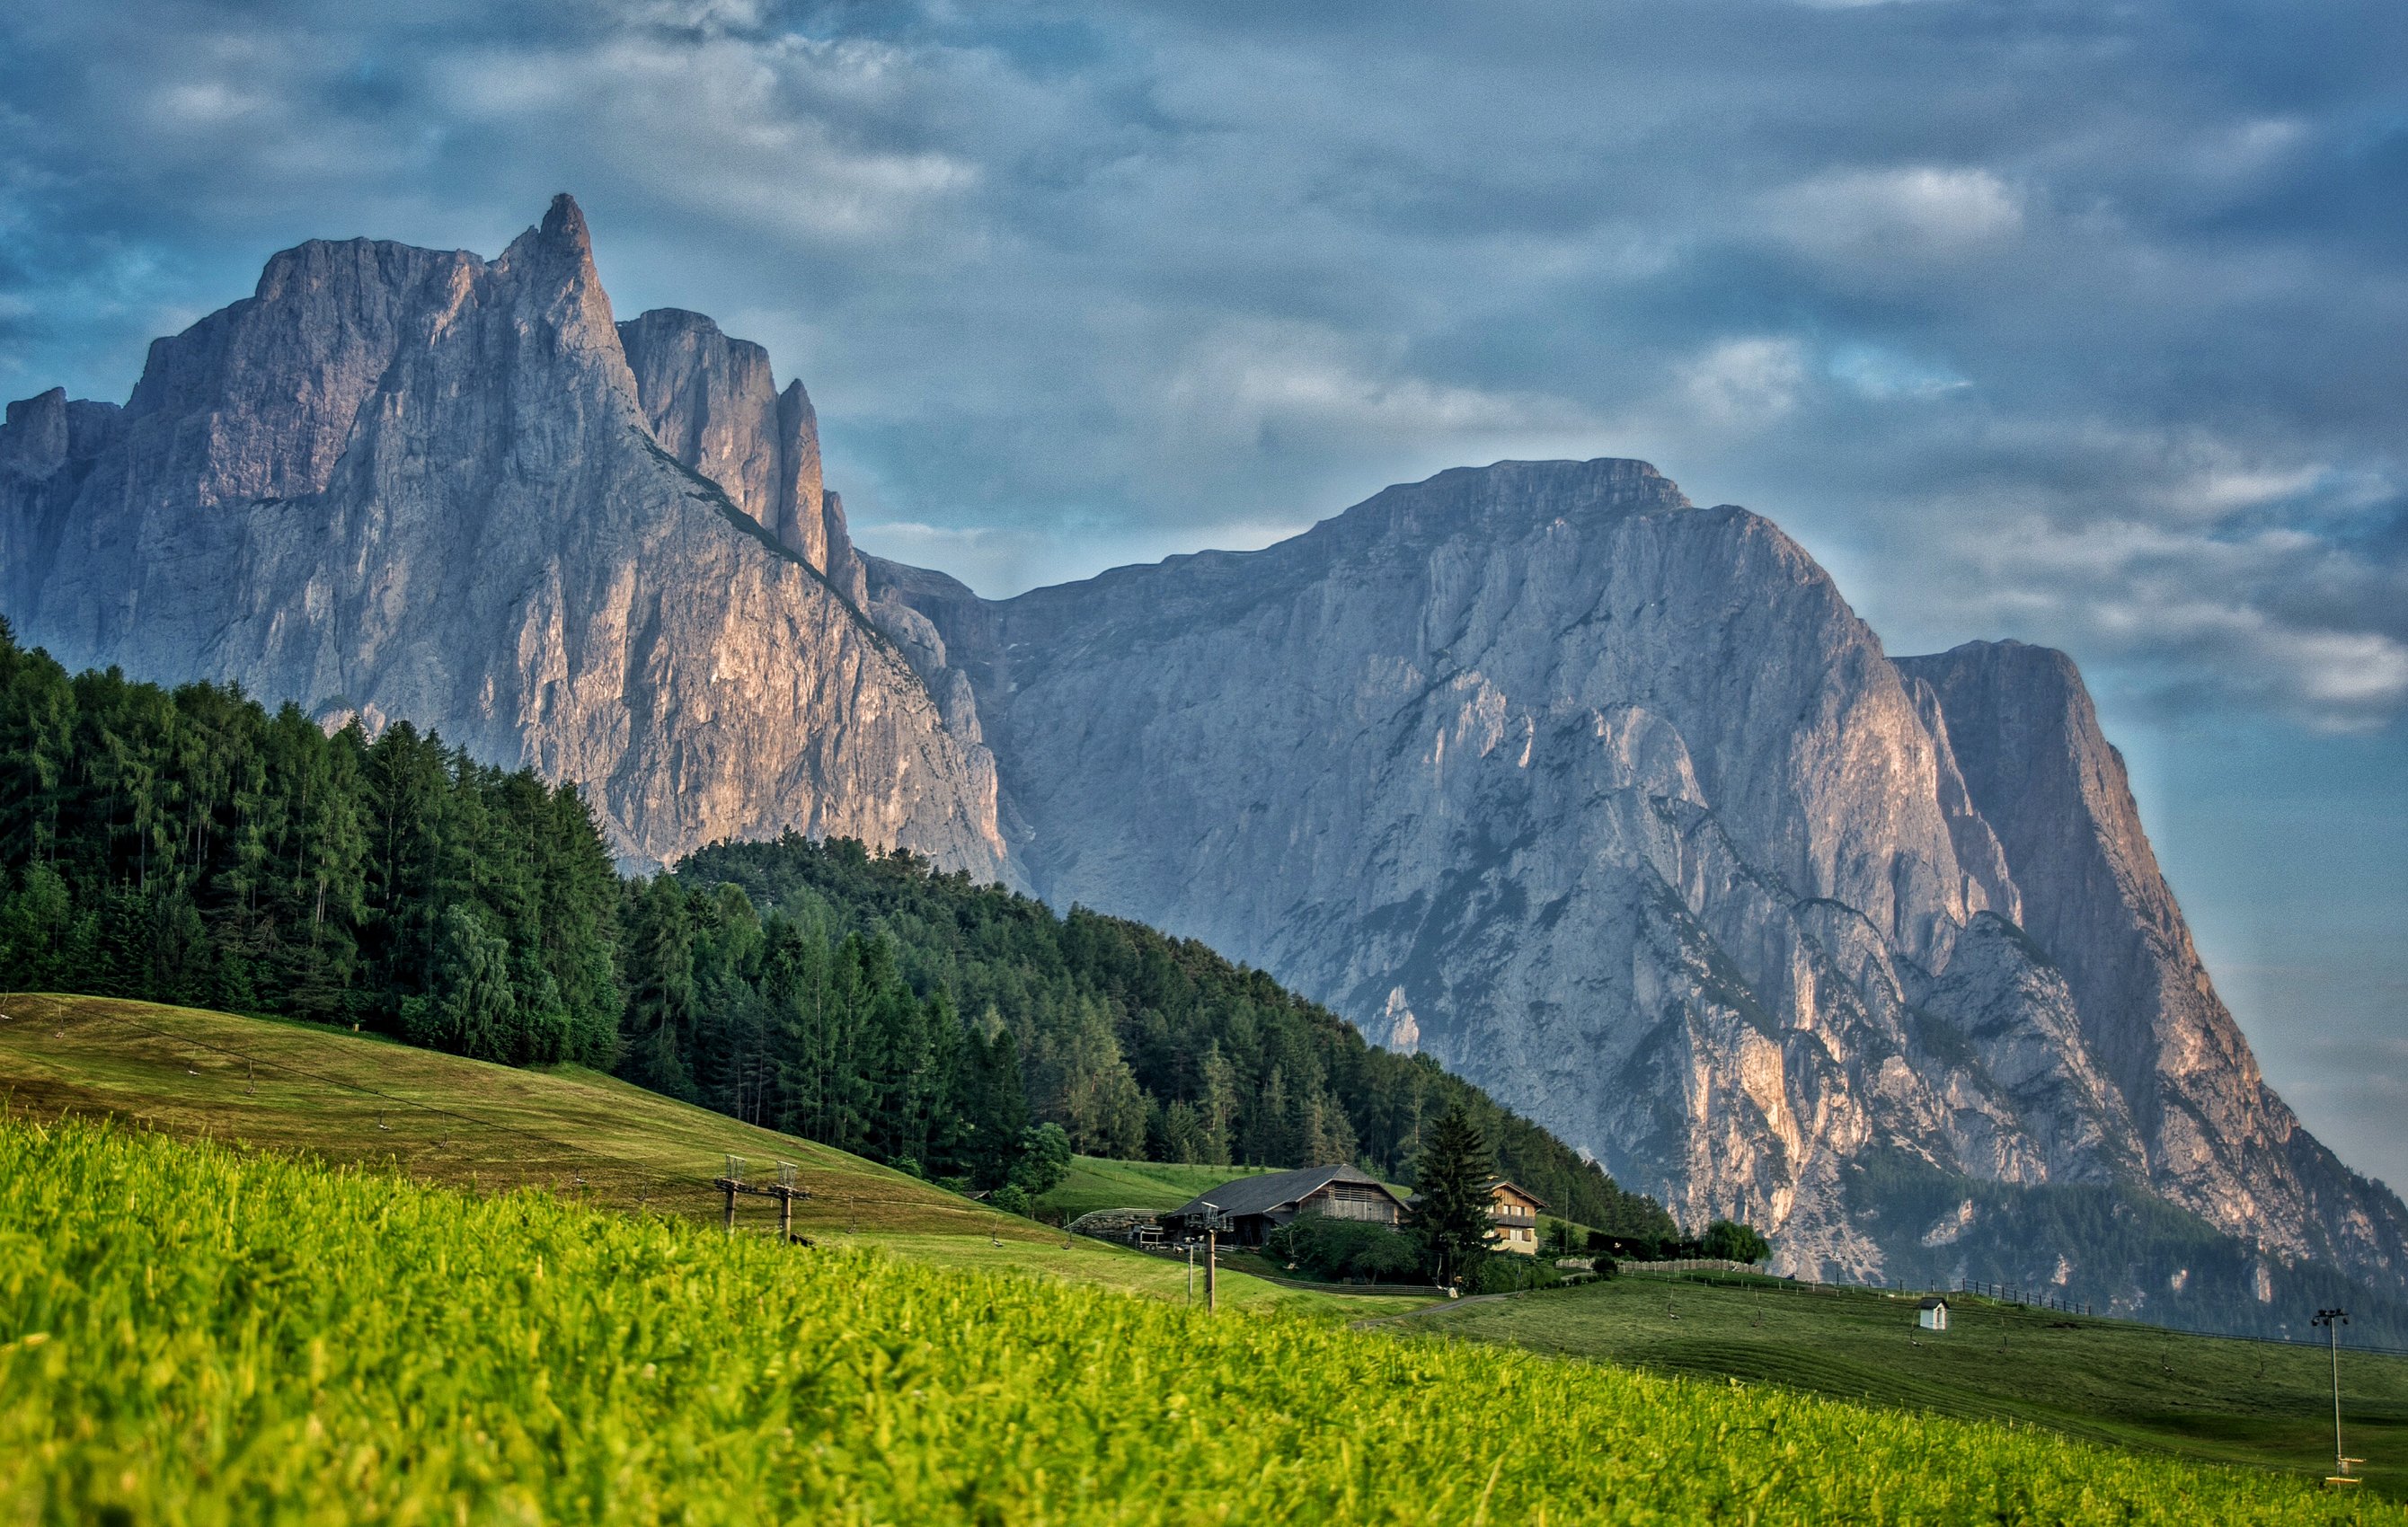 italy, Mountains, Fields, Forests, Sky, Houses, Scenery, Crag, Castelrotto, Nature Wallpaper